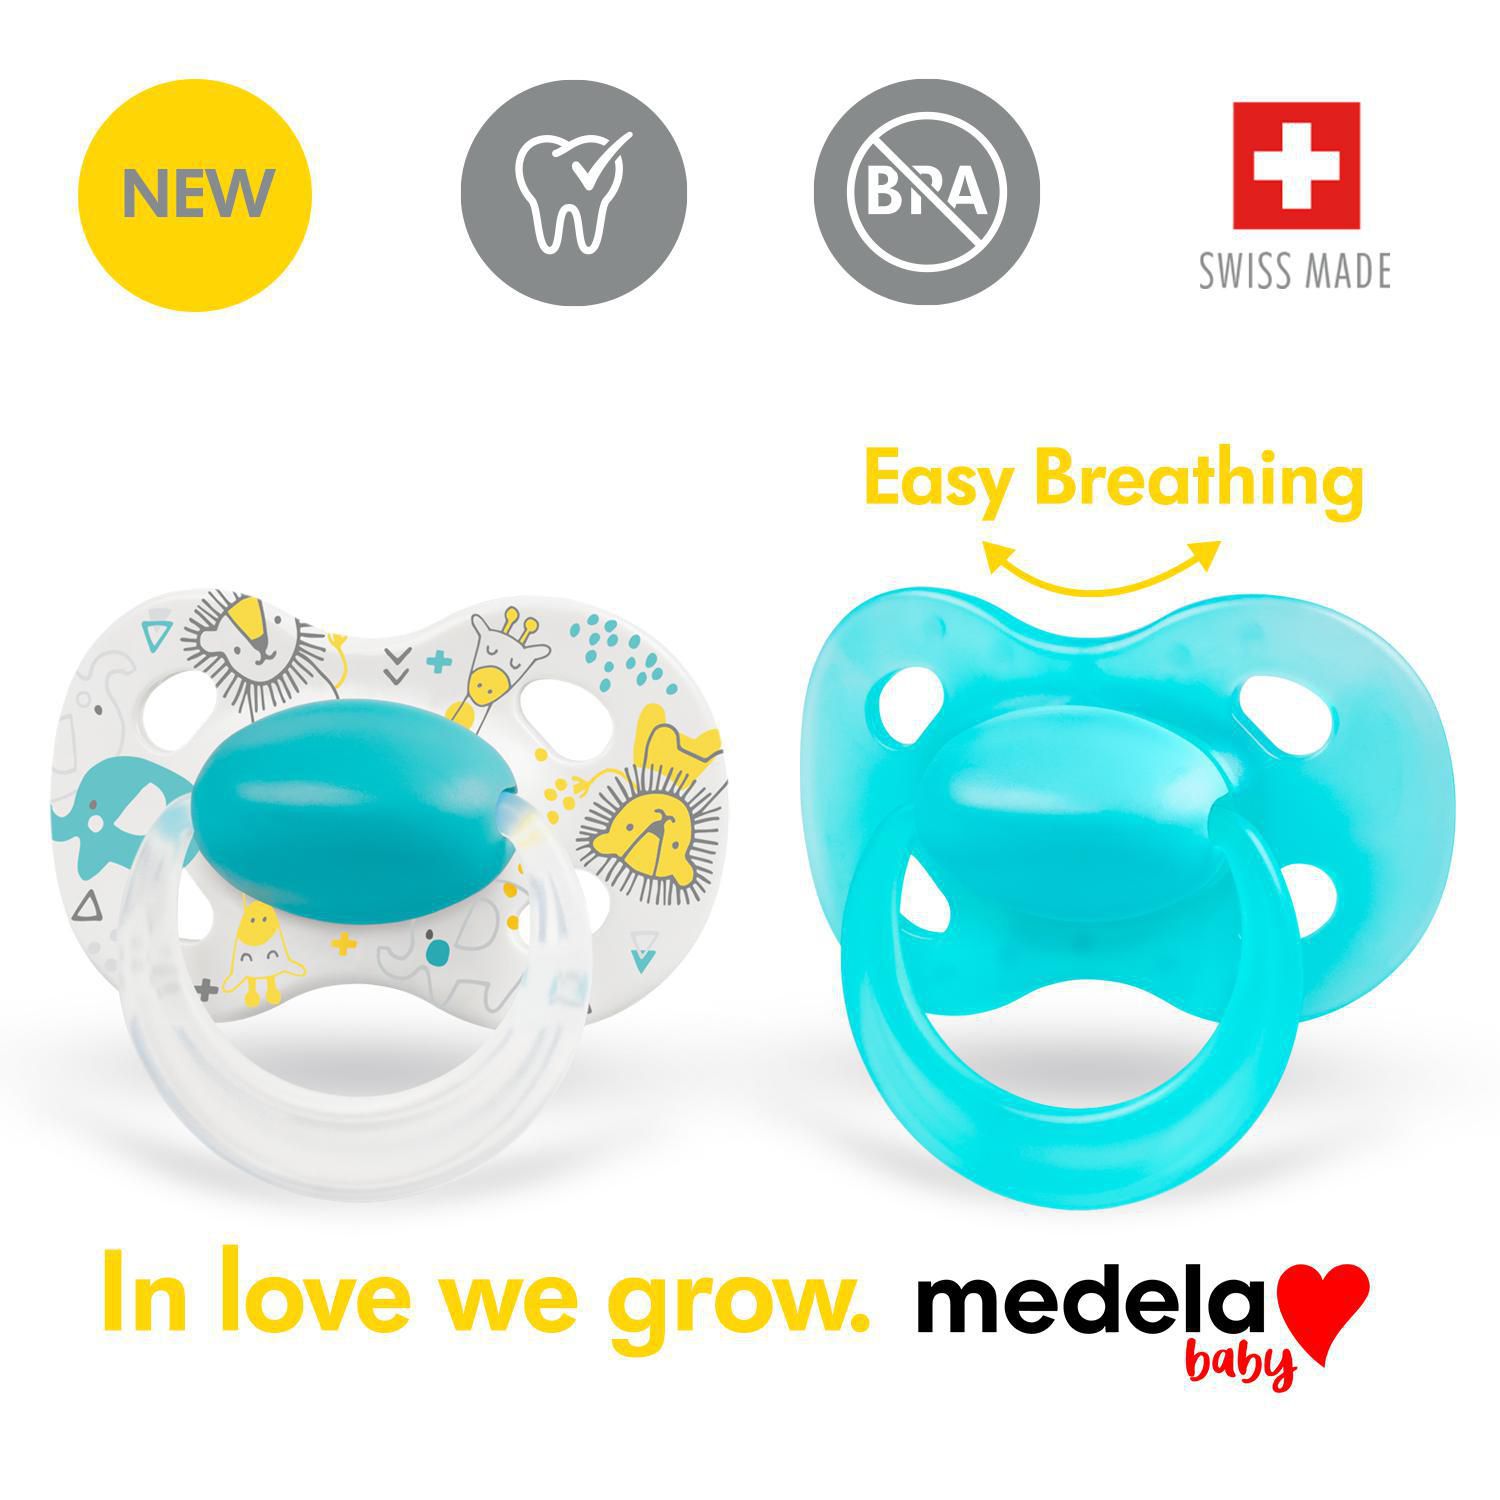 Medela Baby new ORIGINAL Pacifier, Perfect for everyday use, BPA free,  Lightweight and orthodontic - Baby pacifier 0-6 months- Boy 